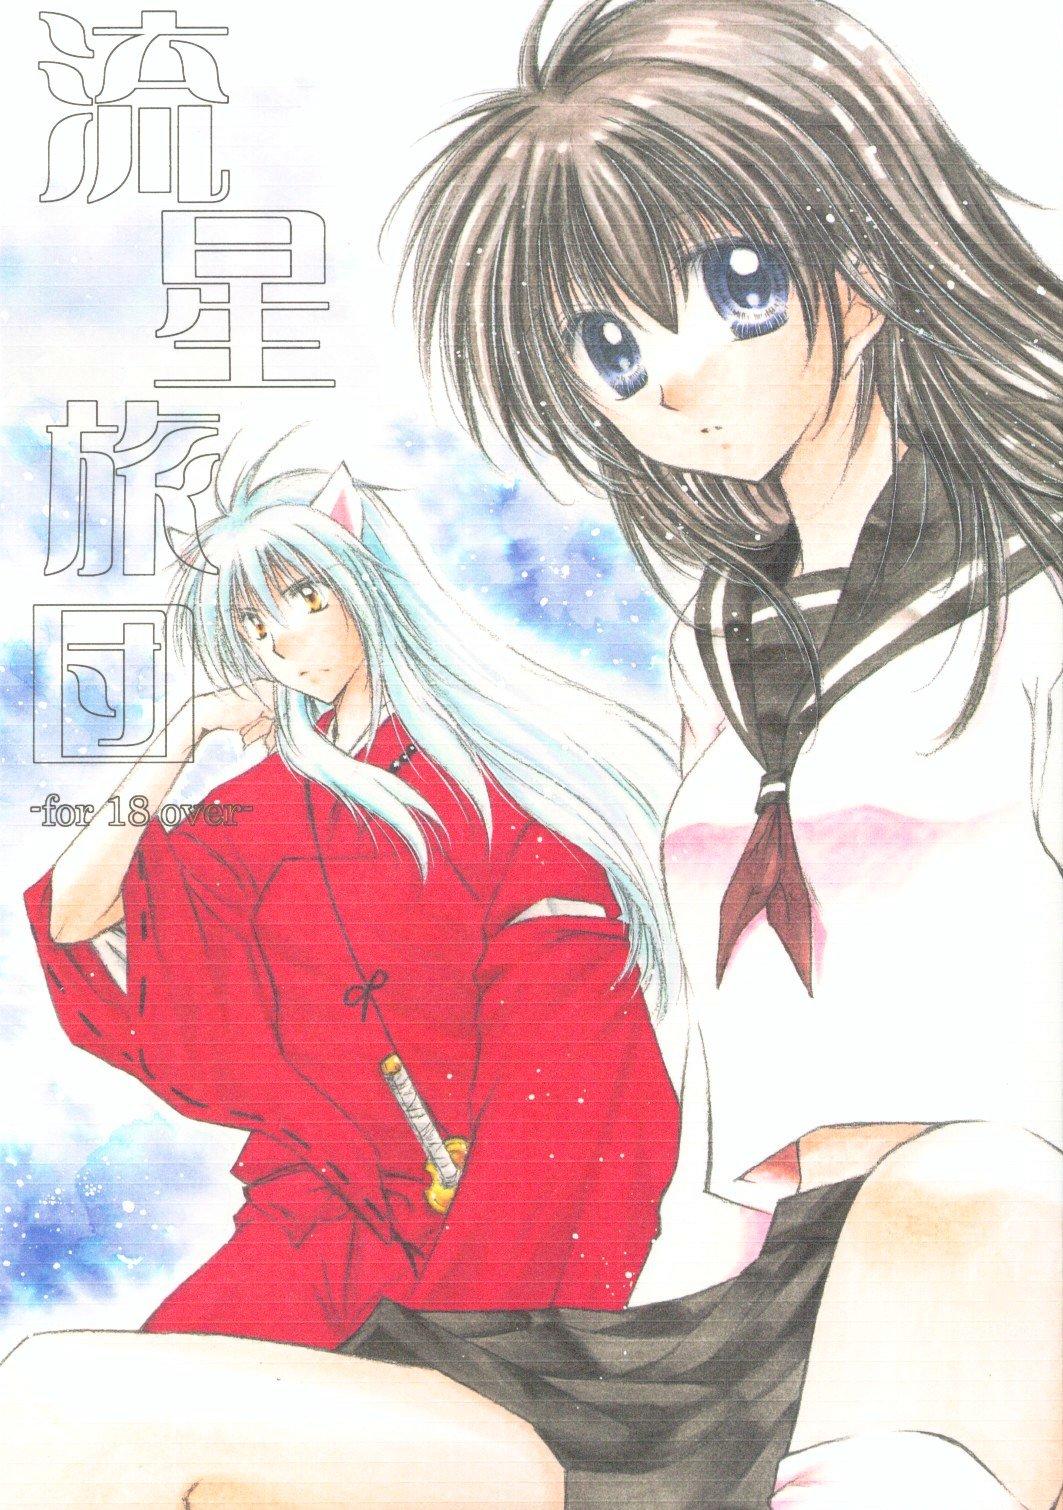 Roleplay Ryuusei Ryodan - Inuyasha Best Blowjob Ever - Picture 1